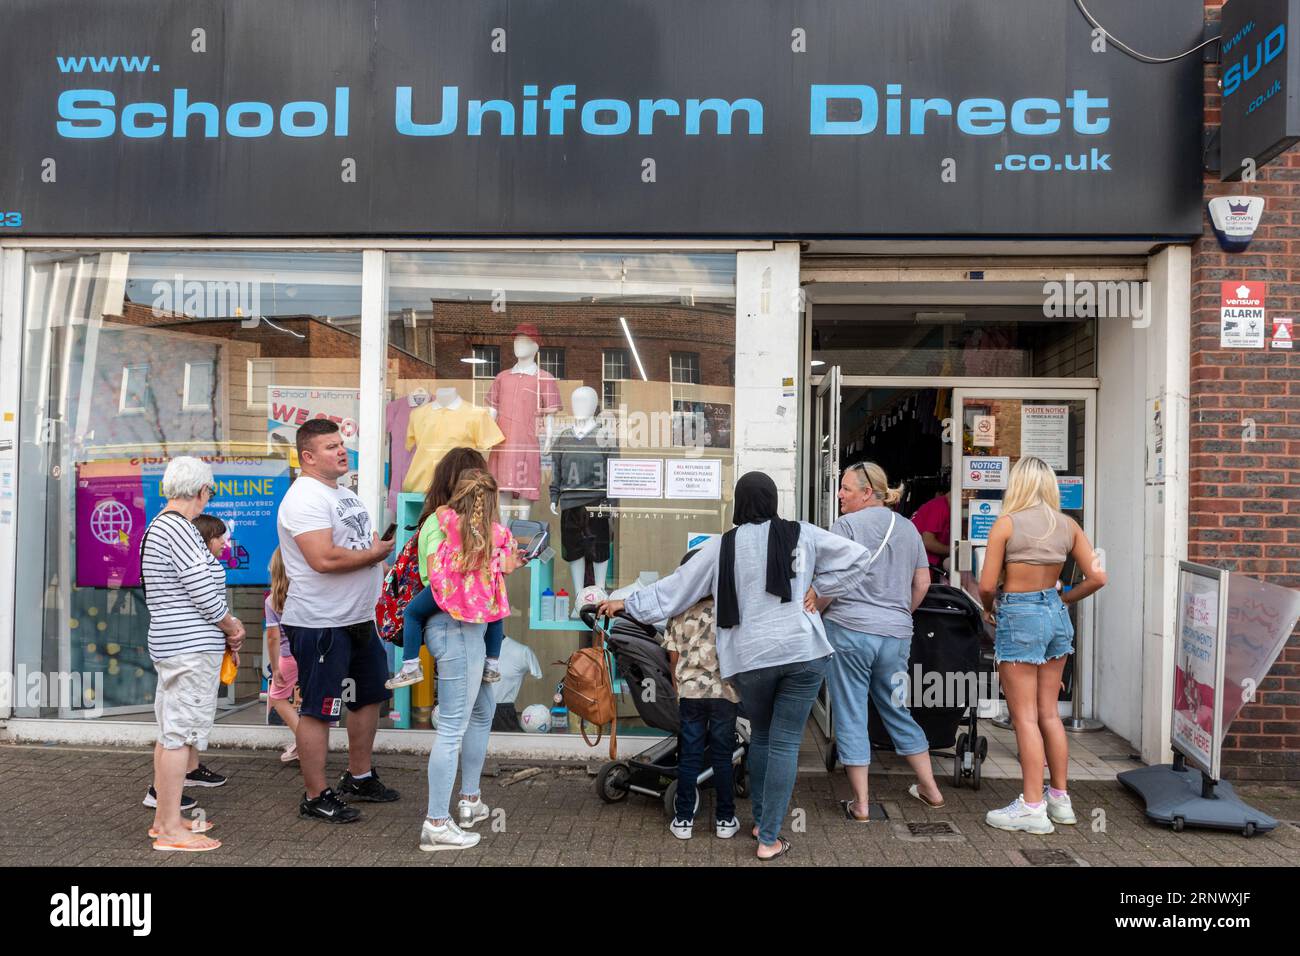 People buying school uniforms. September 2nd 2023. People queue outside a School Uniform Direct shop in Staines-upon-Thames in Surrey, England, UK, waiting to buy school uniform a few days before children go back to school for the new term. The high cost of school uniforms is causing difficulties to some families during the cost of living crisis. Stock Photo